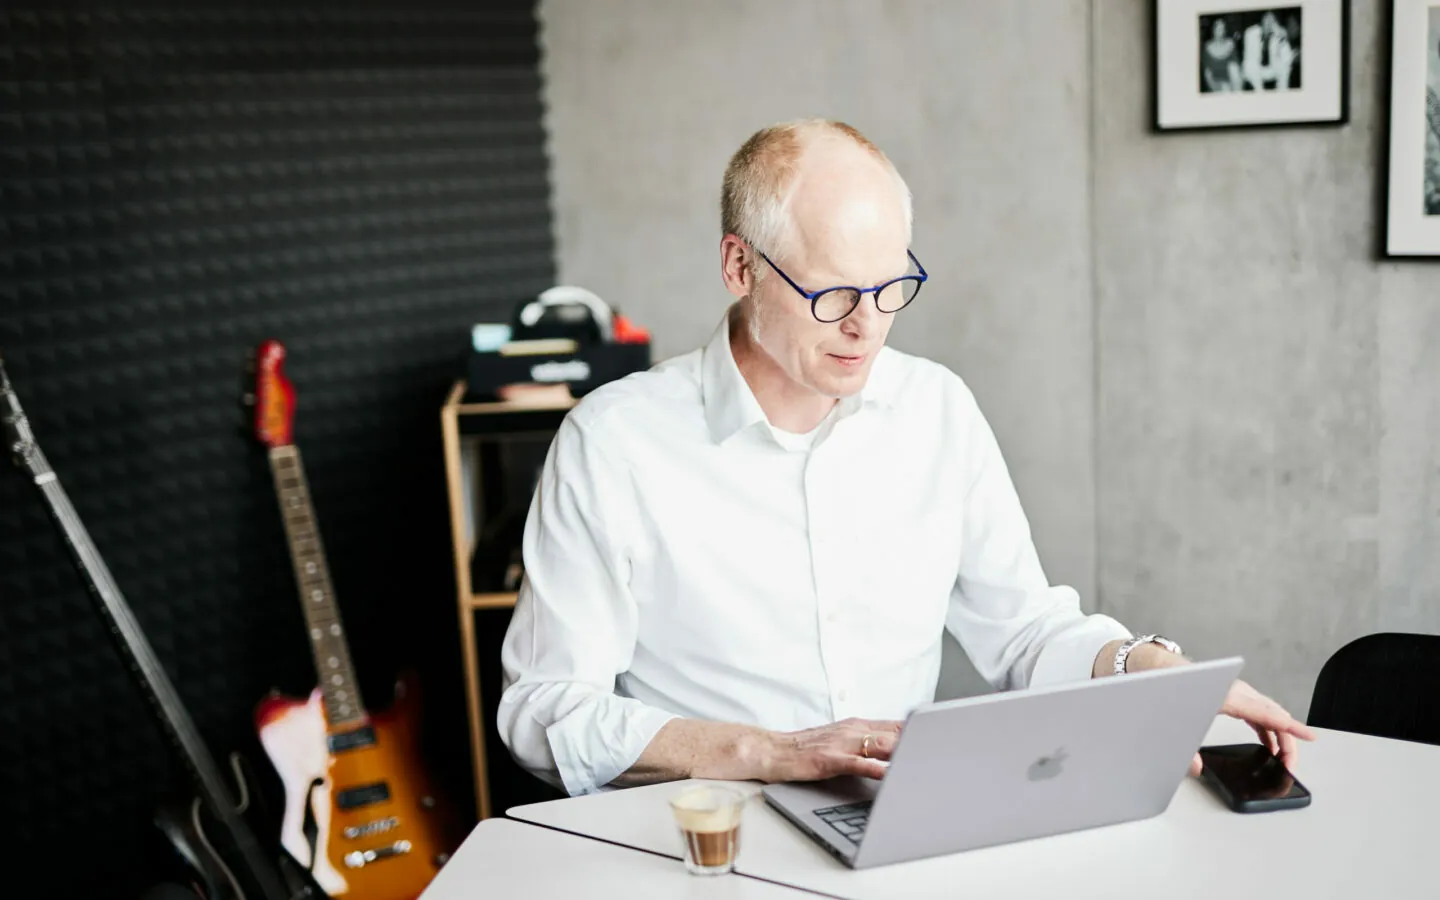 An older man working on his laptop and reaching for his smartphone – electric guitars can be seen in the background.